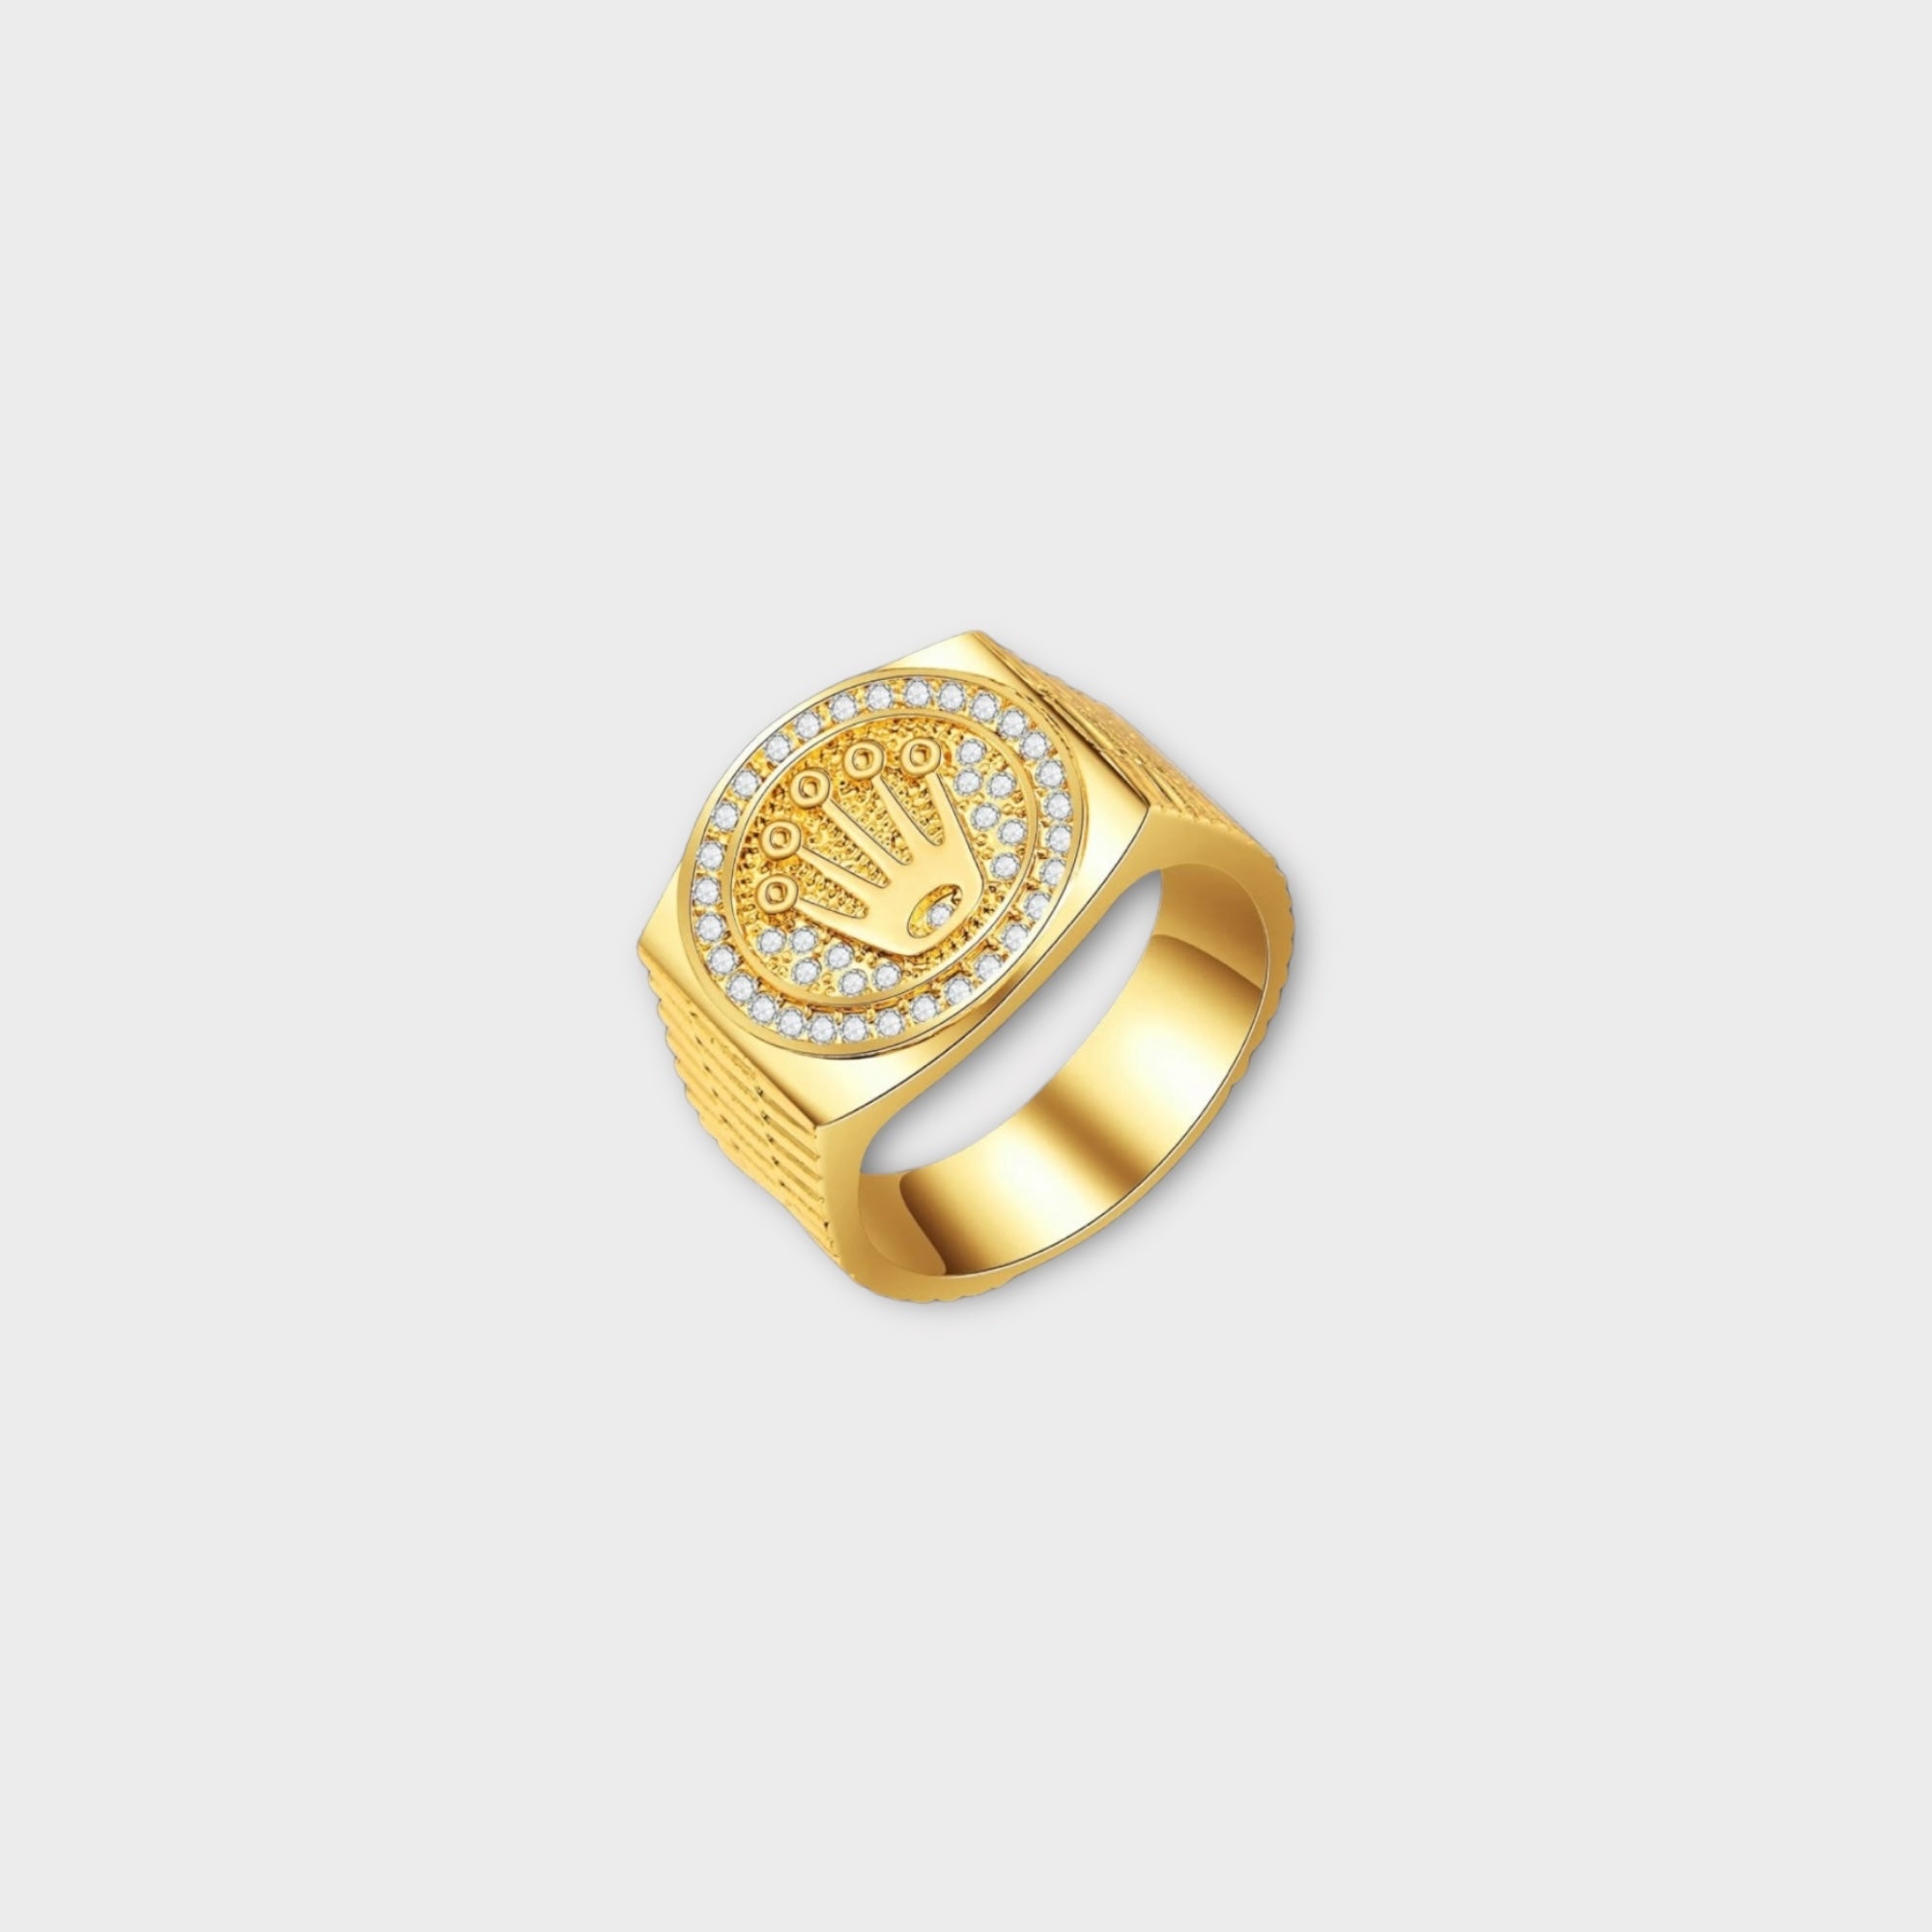 'ROX' Rolex silver and gold crown ring